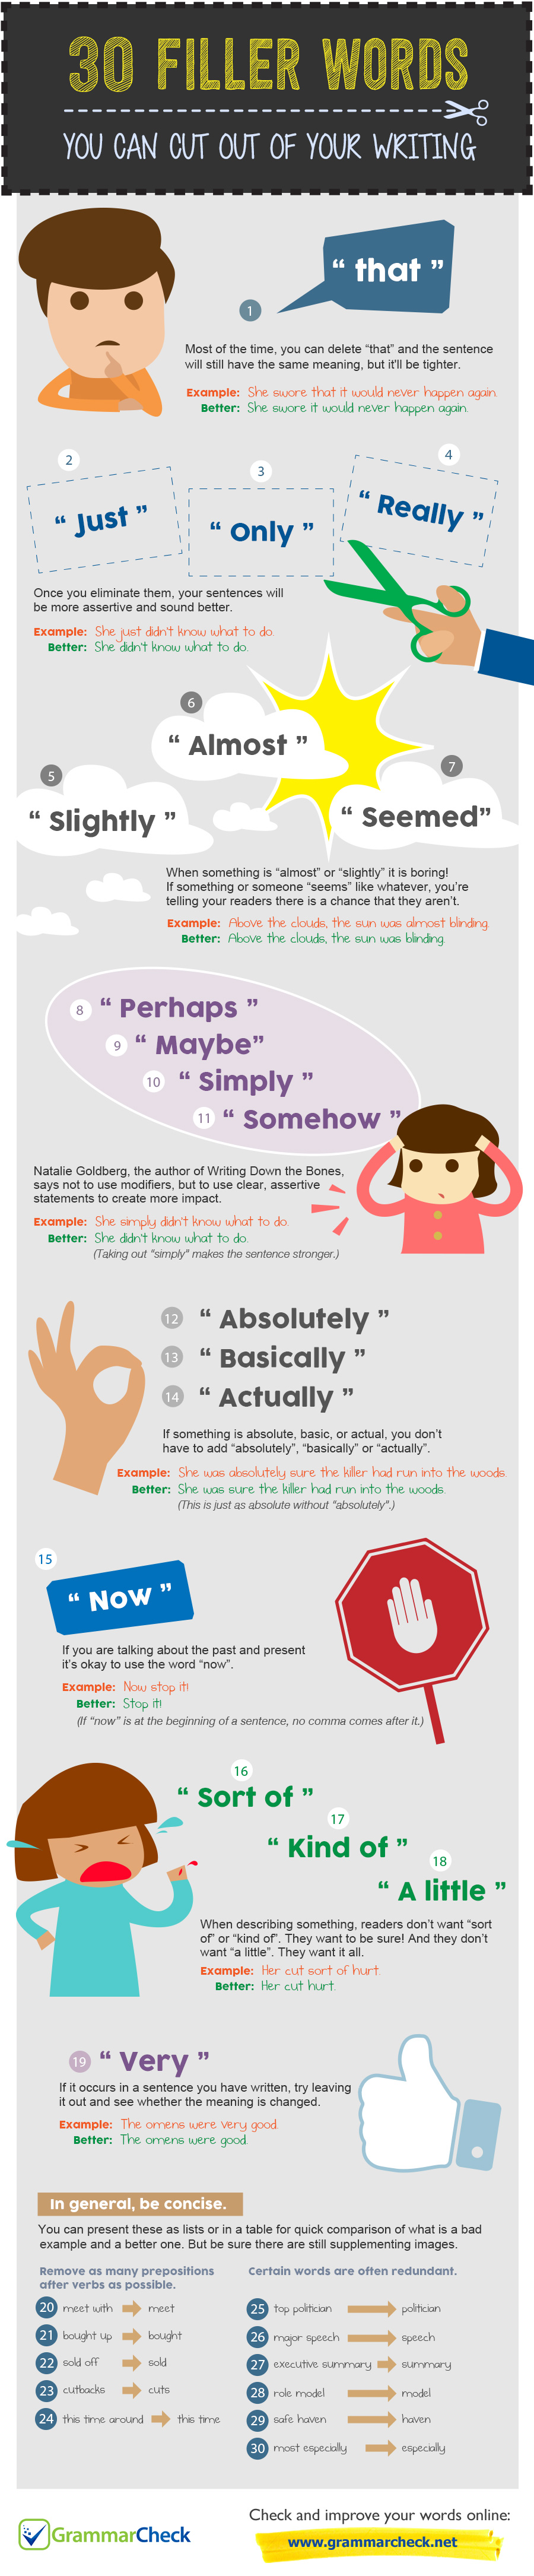 30 Filler Words You Can Cut Out of Your Writing (Infographic)